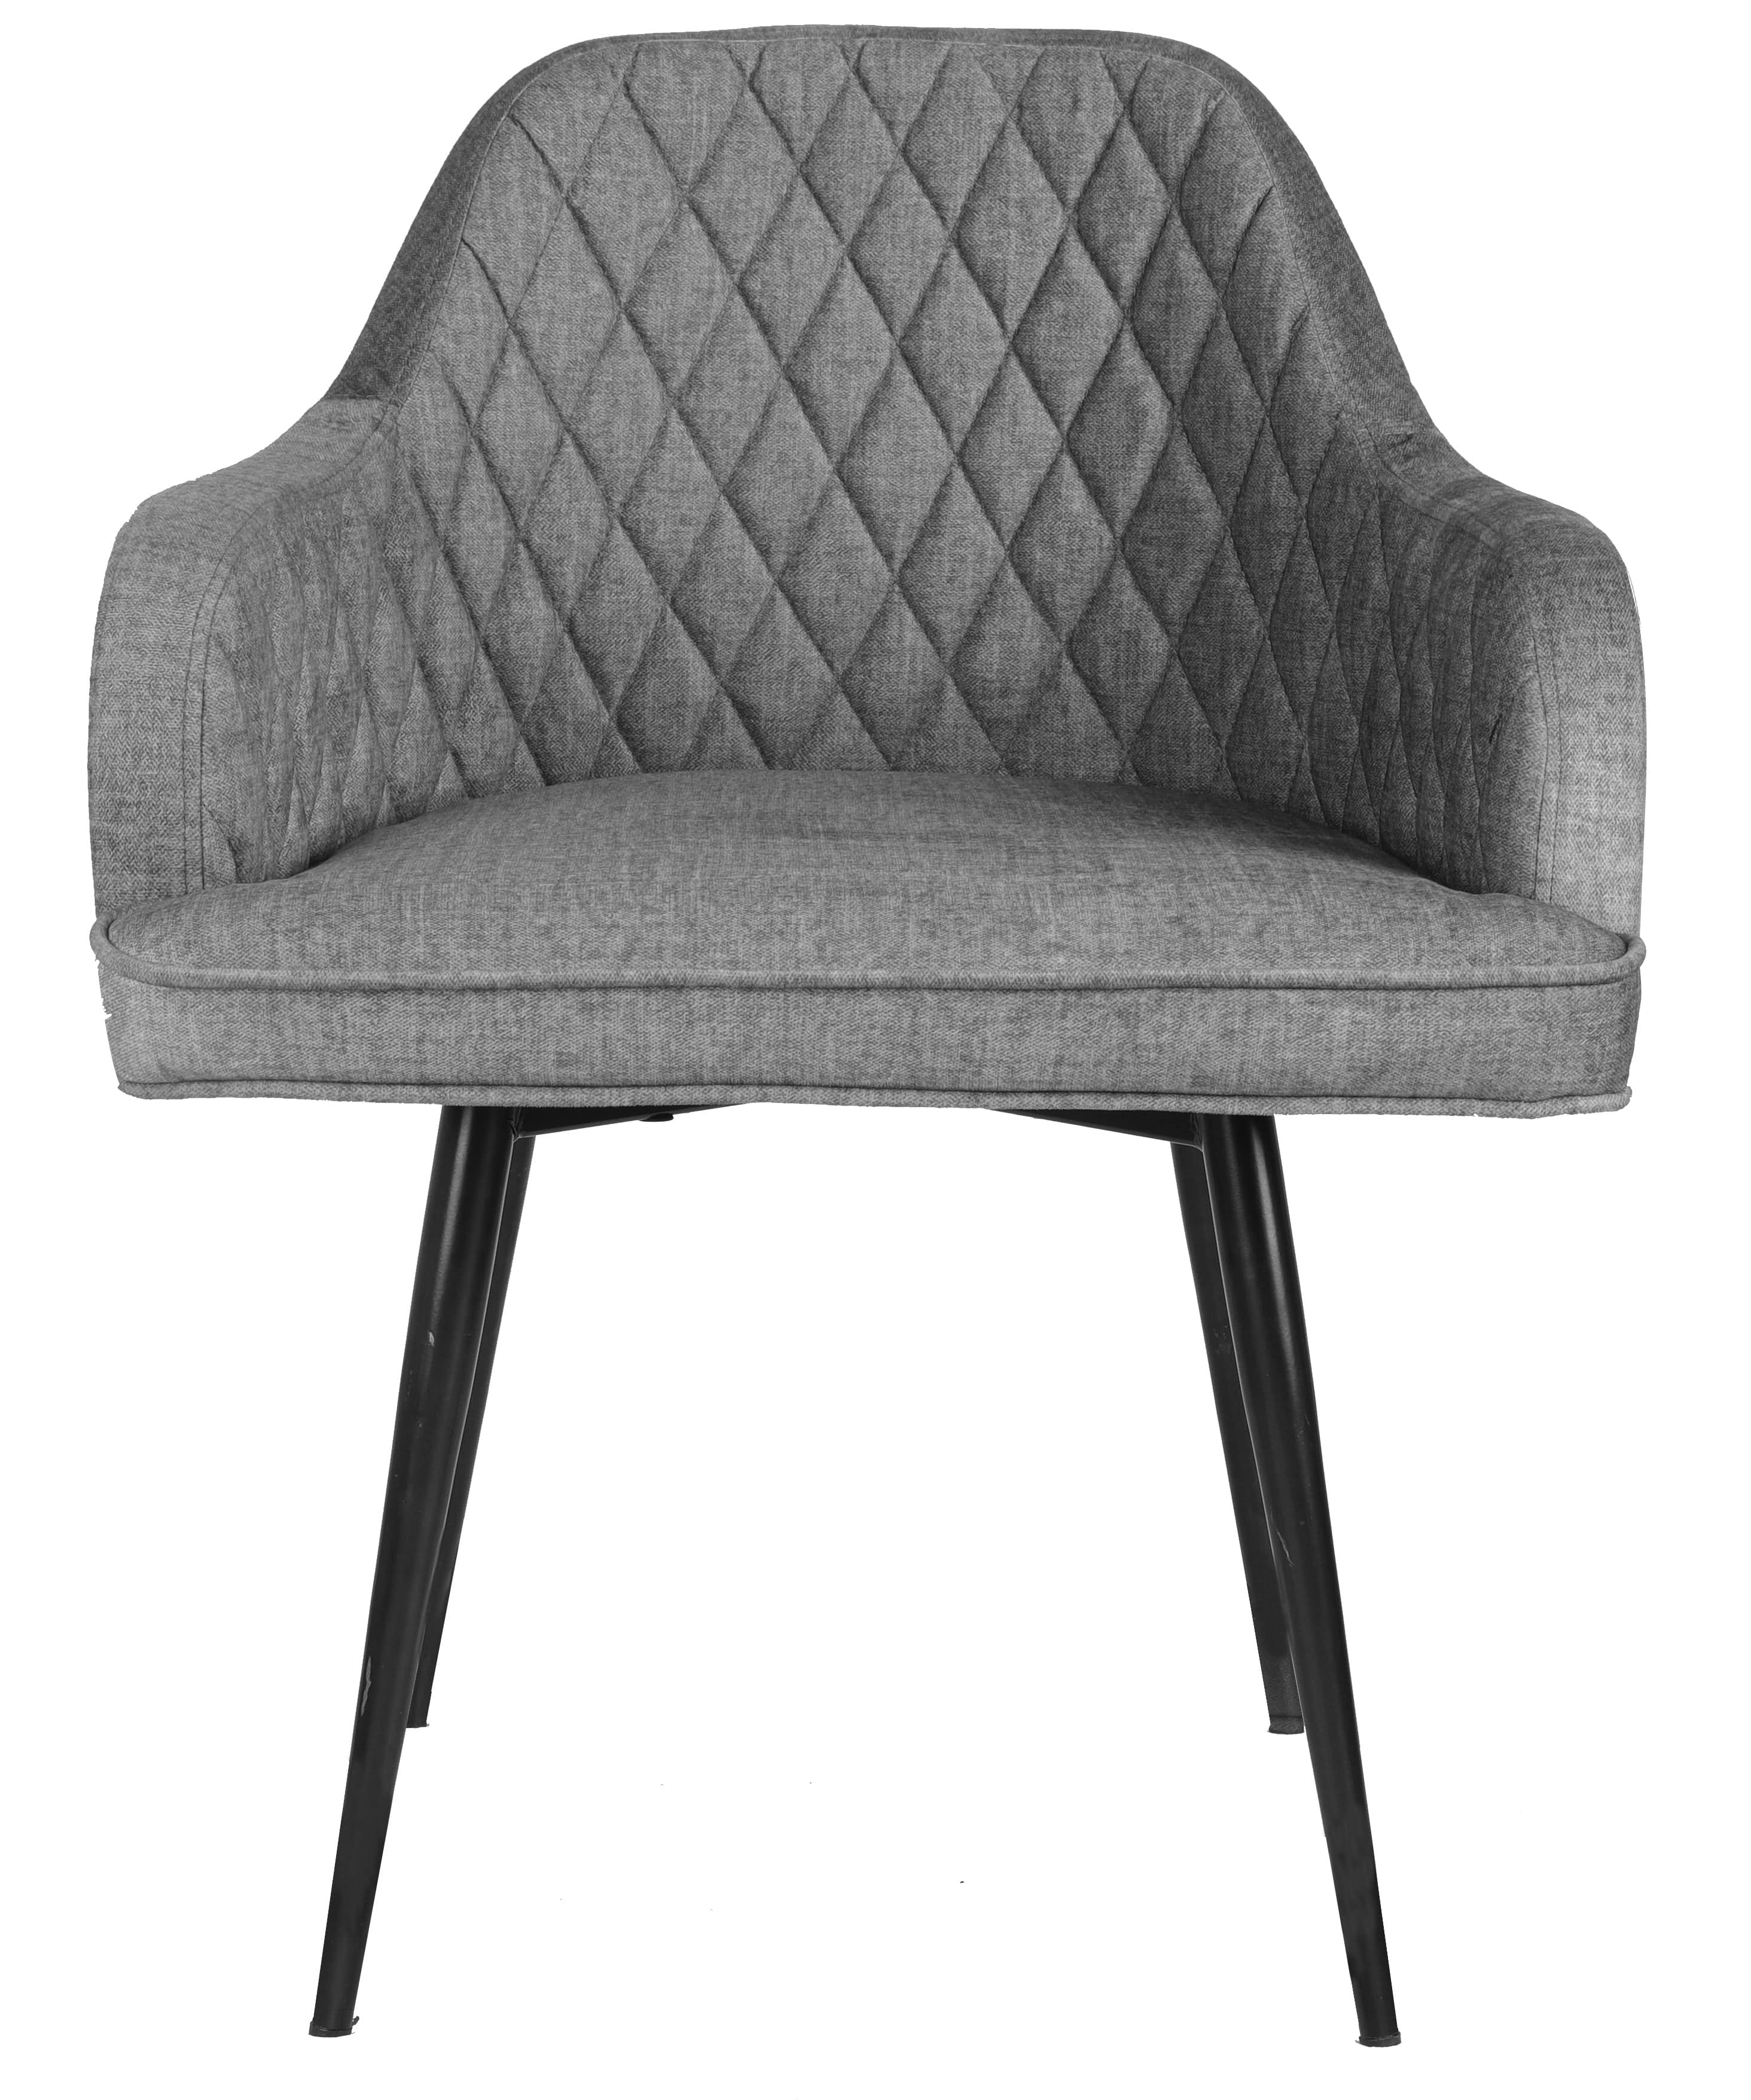 Adiko Lounge Chair Stool in Grey Color